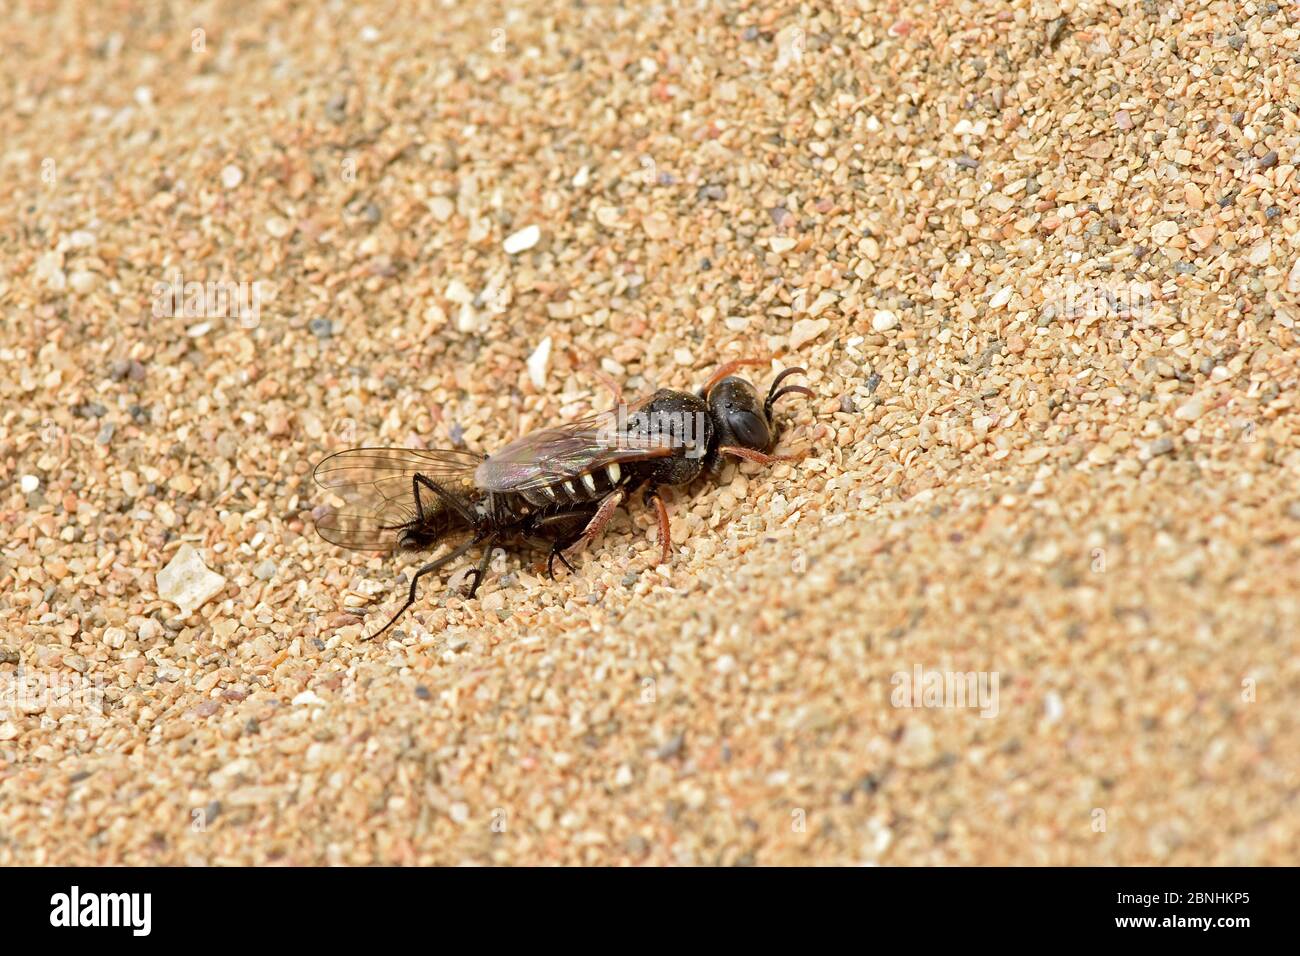 Digger wasp (Oxybelus uniglumis) wasp shown returning to her burrow with paralysed fly impaled on her sting a characteristic of this species, Cornwall Stock Photo